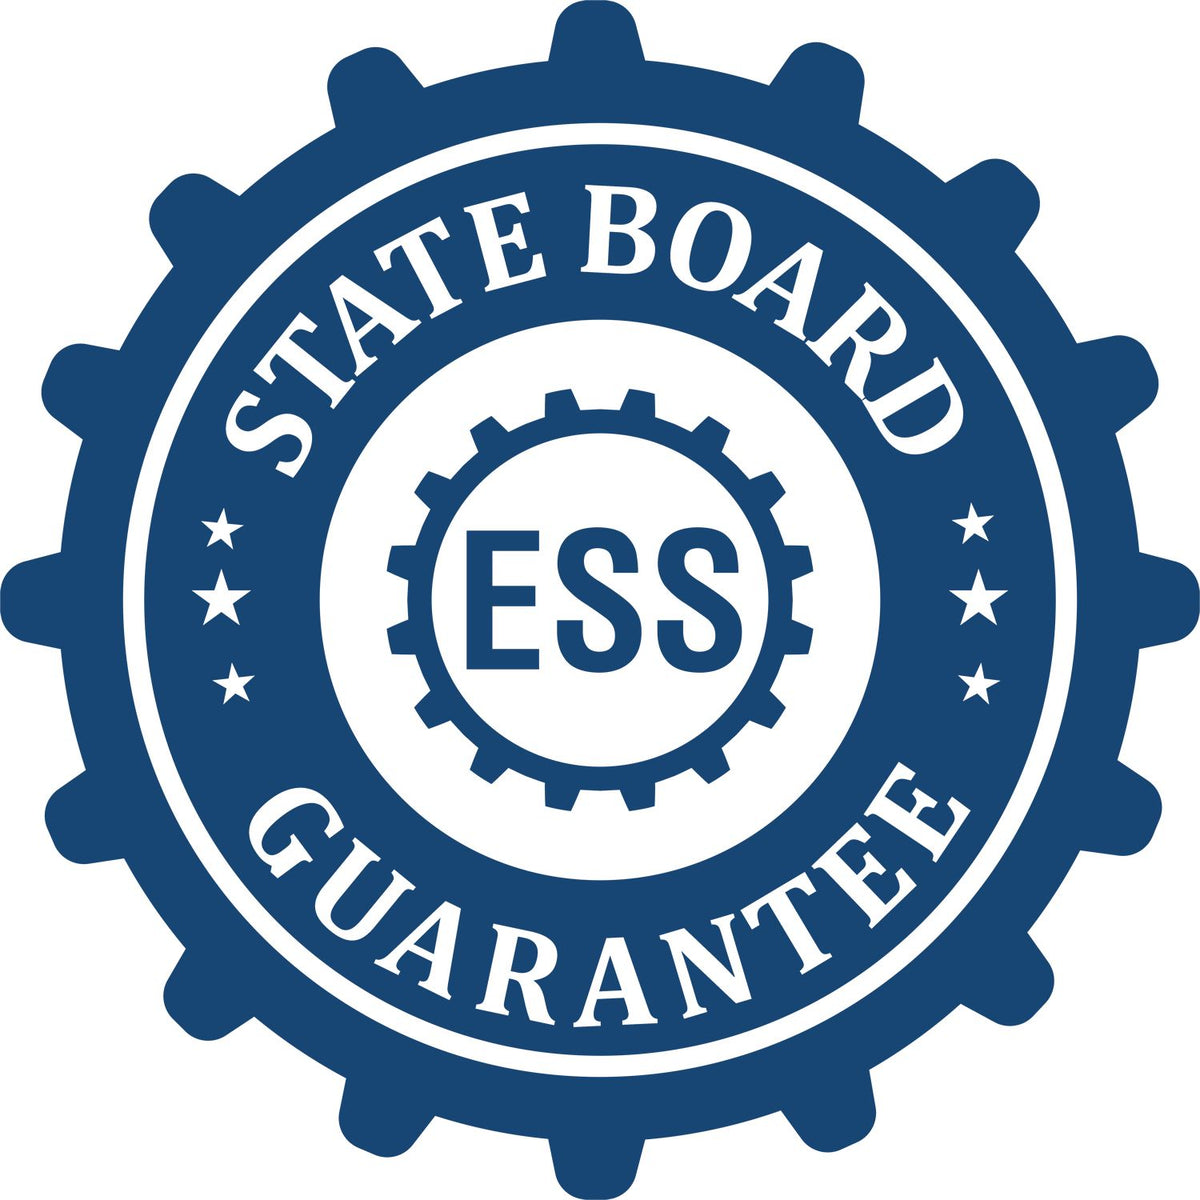 An emblem in a gear shape illustrating a state board guarantee for the Massachusetts Engineer Desk Seal product.